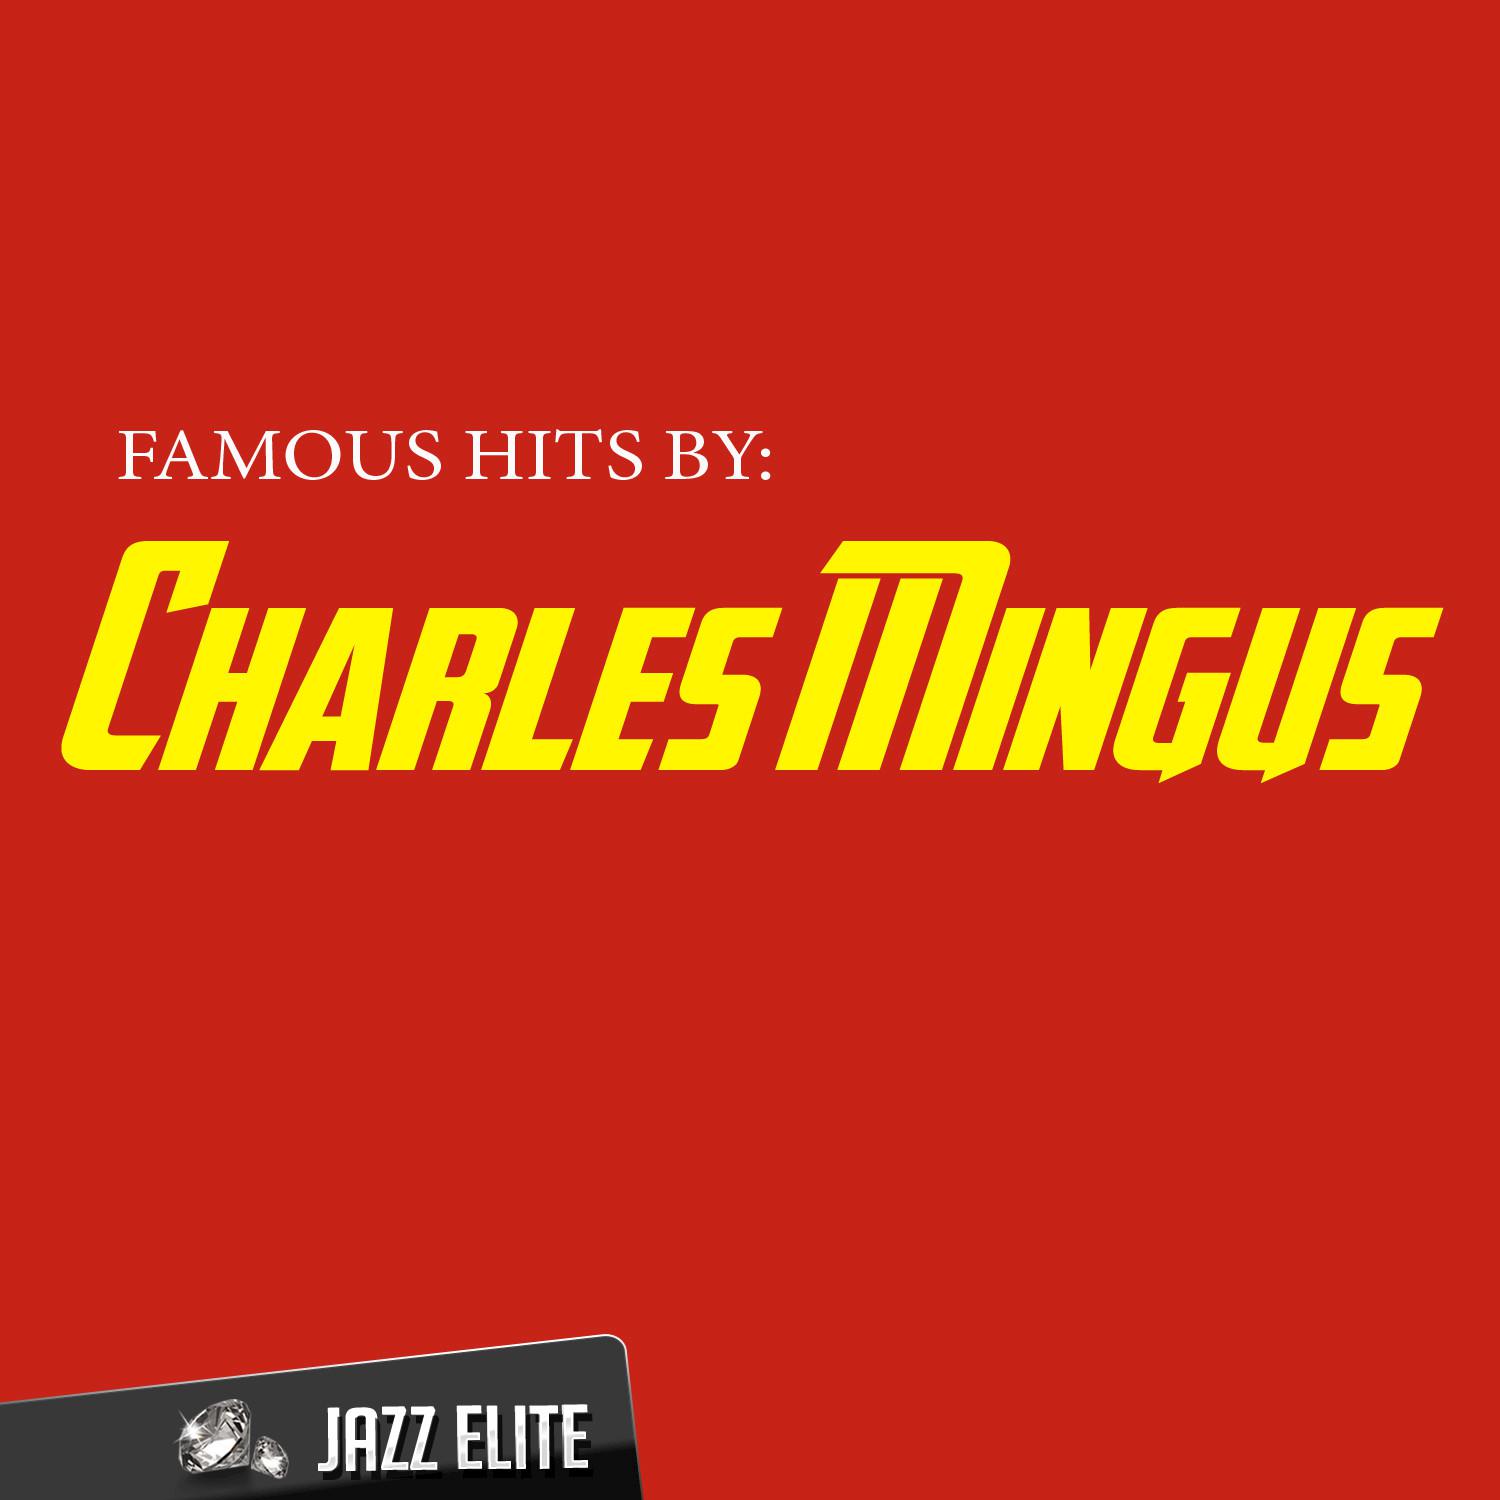 Famous Hits by Charles Mingus